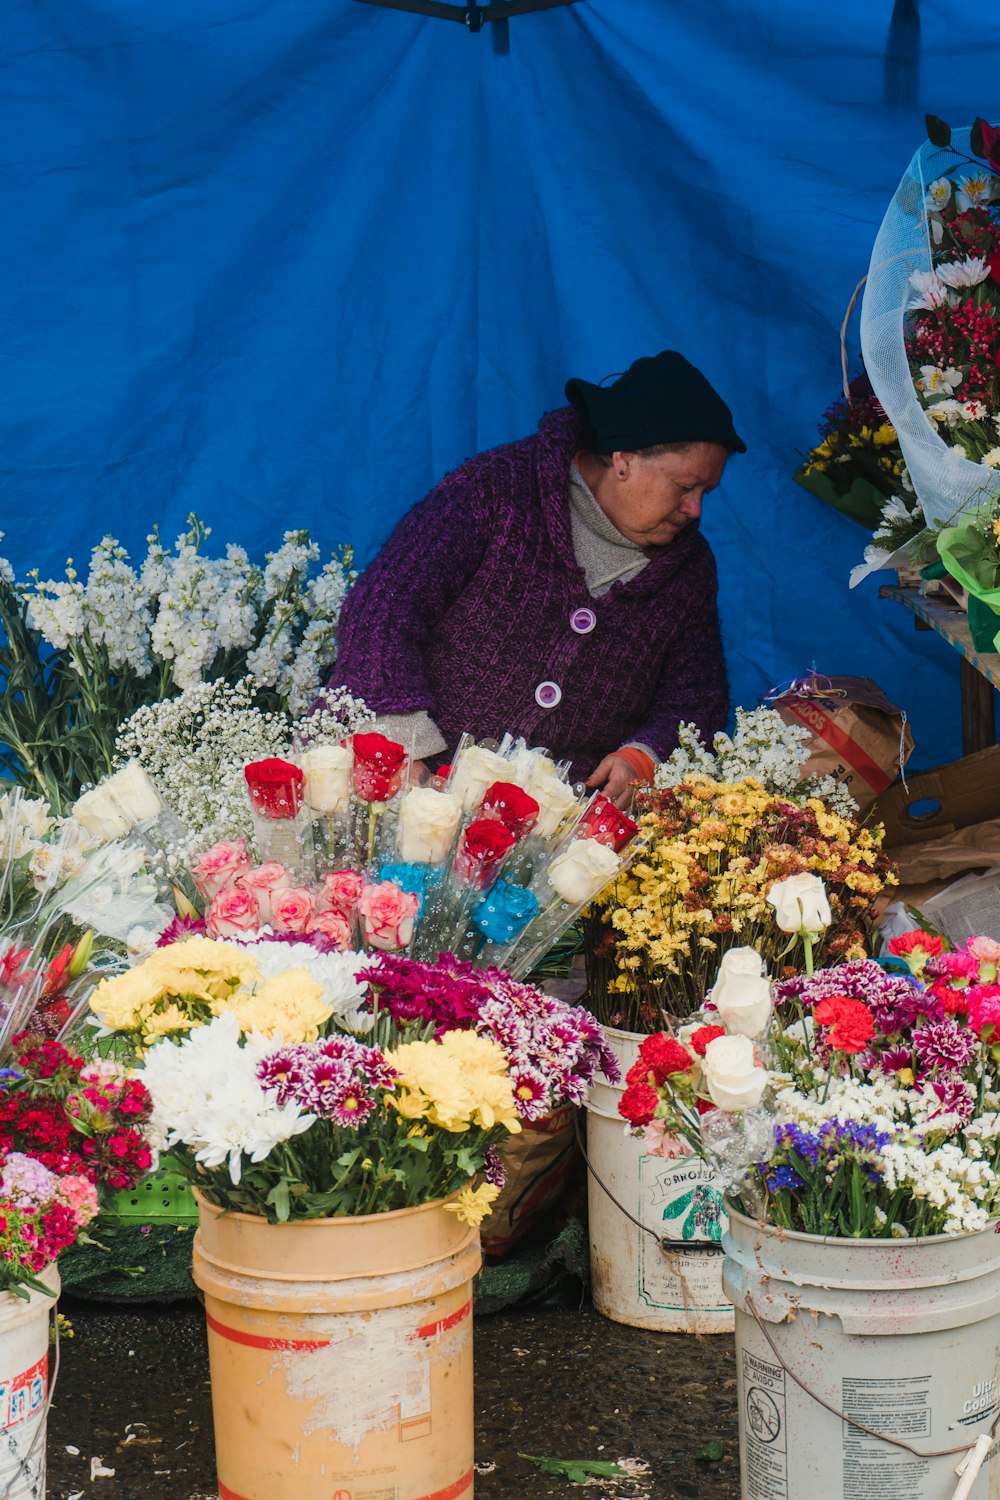 a woman arranging flowers in buckets in front of a blue tarp